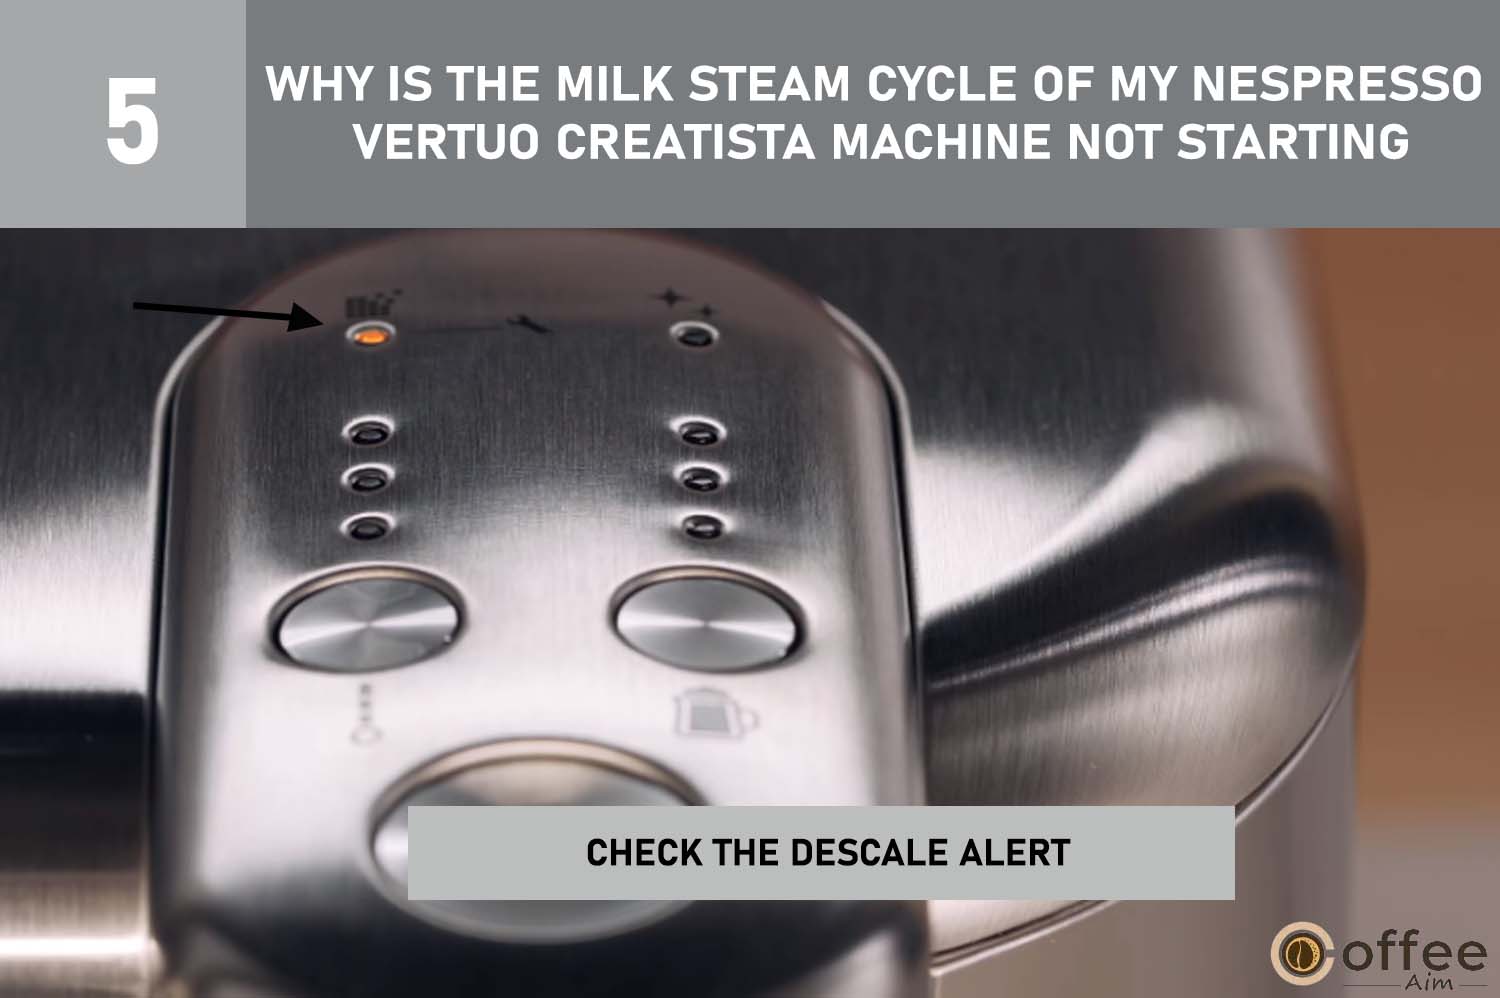 The image illustrates how to check the descale alert in the Nespresso Vertuo Creatista machine when the milk steam cycle stalls.